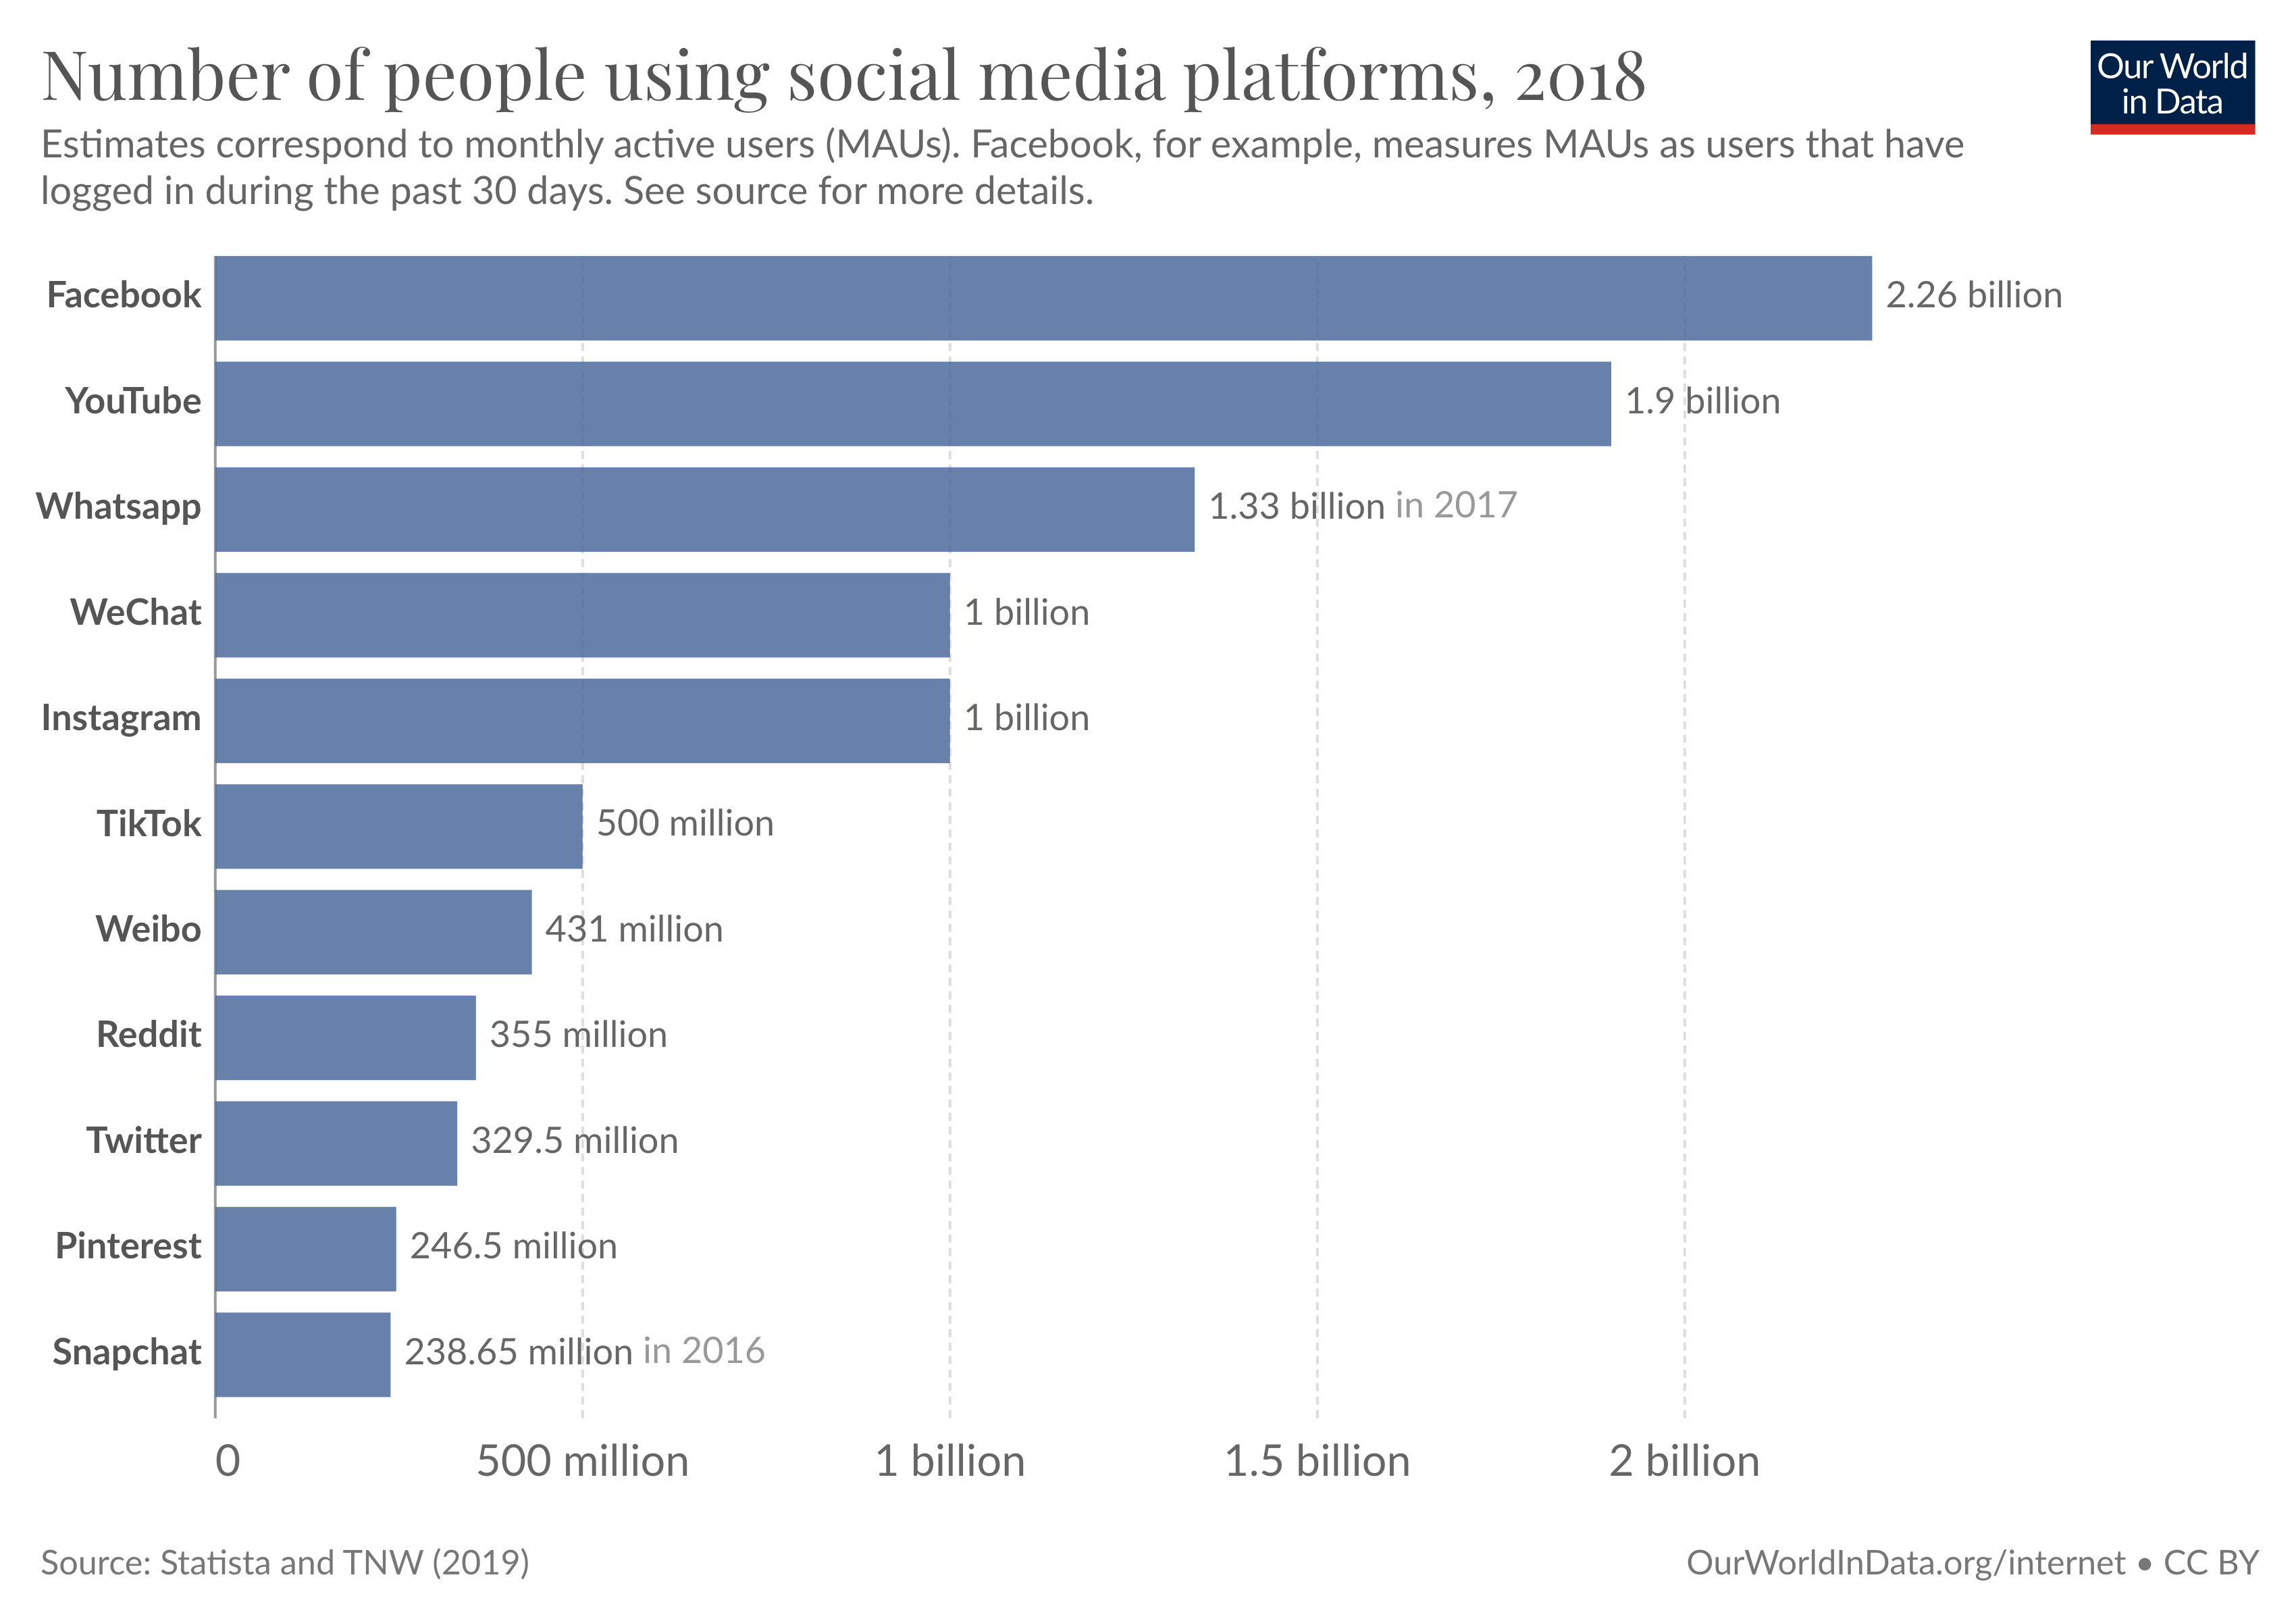 Bar chart of social media users by platform which shows that Facebook is the most popular, followed by YouTube and Whatsapp.